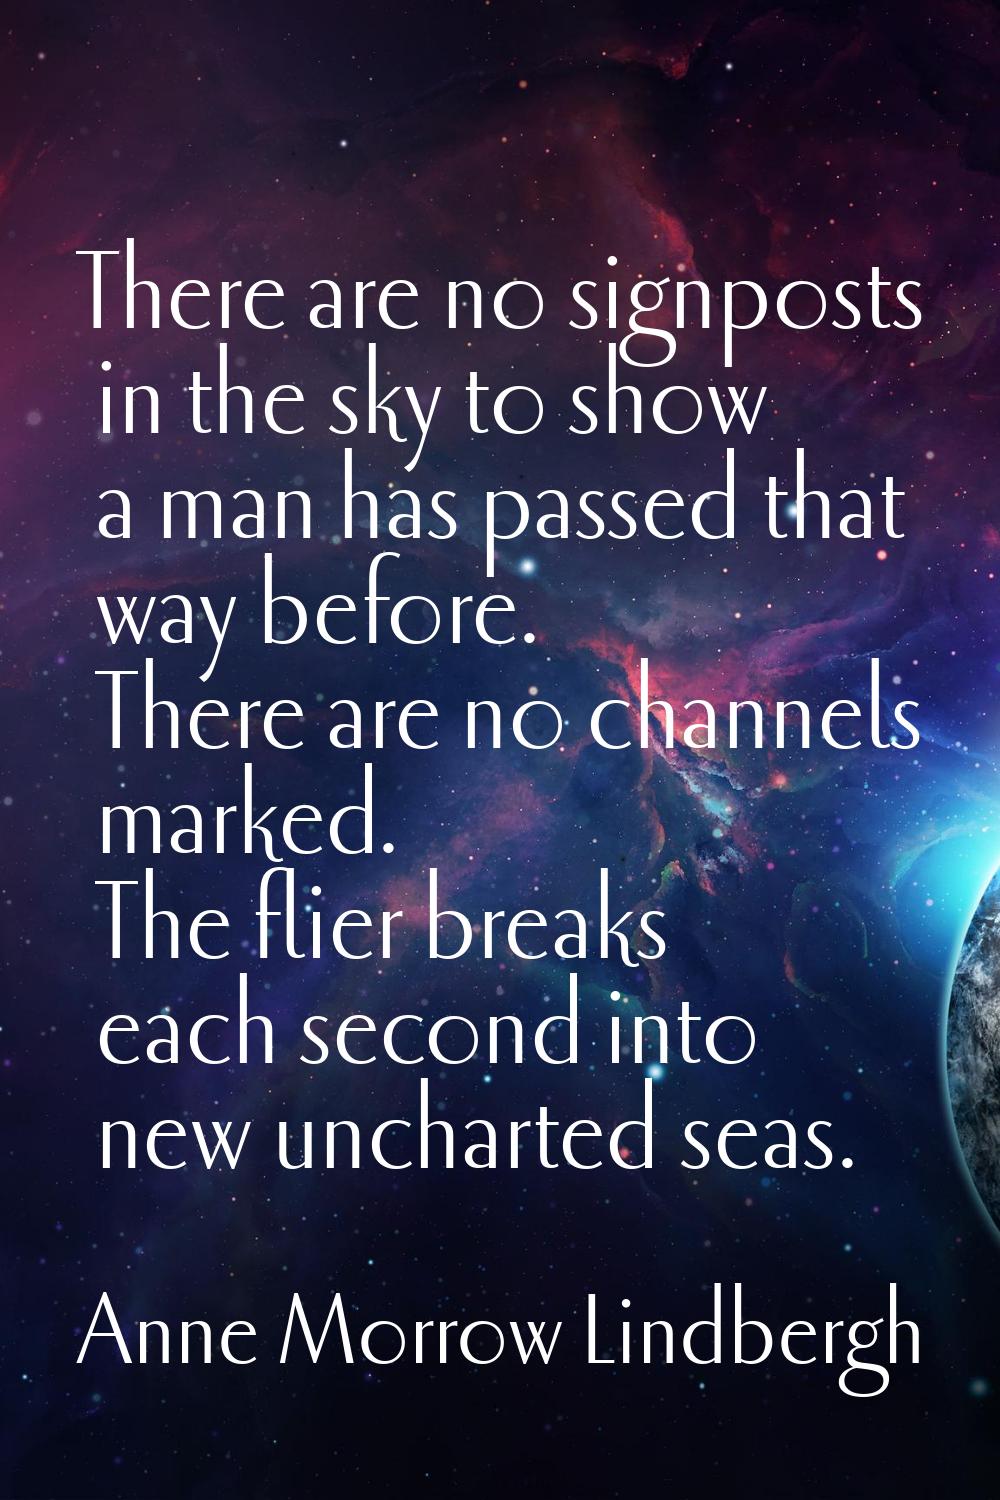 There are no signposts in the sky to show a man has passed that way before. There are no channels m